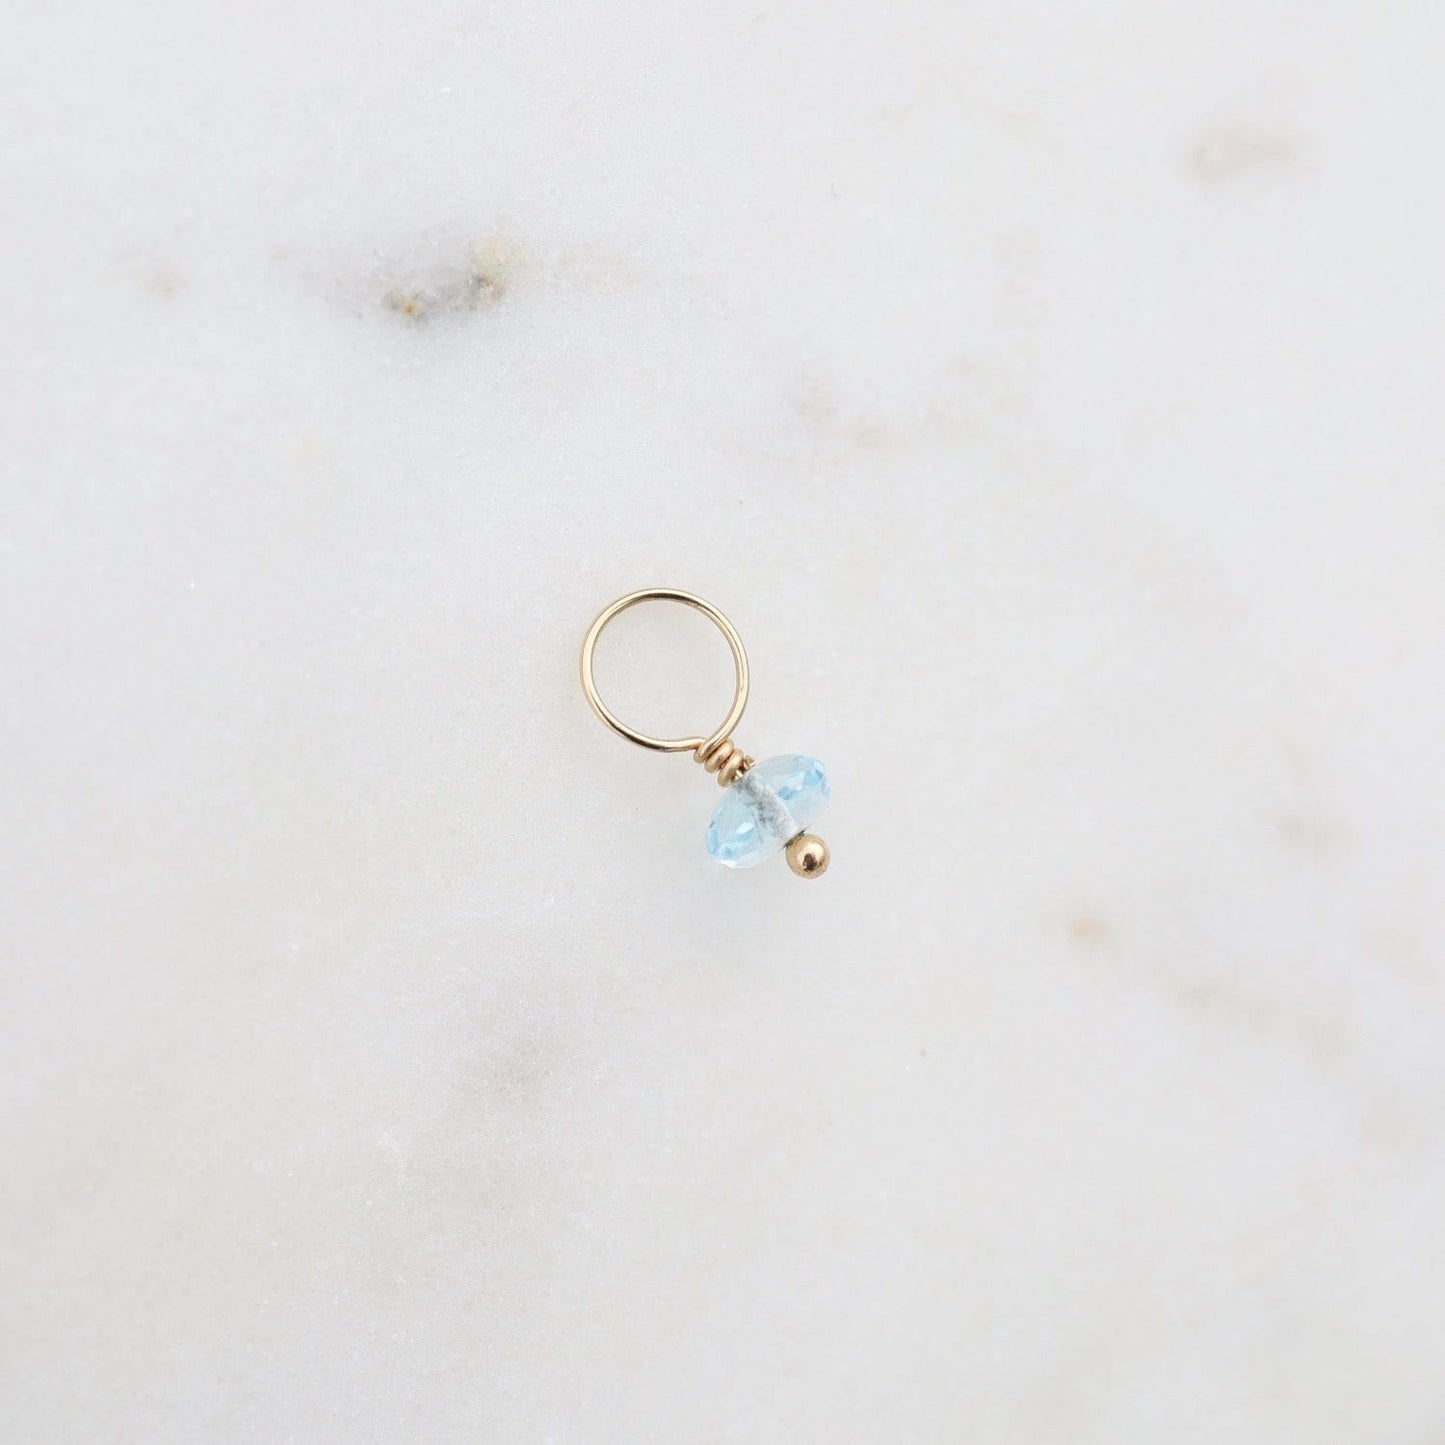 CHM Blue Topaz -  Faceted Rondelle Gemstone on 14k Gold Wire